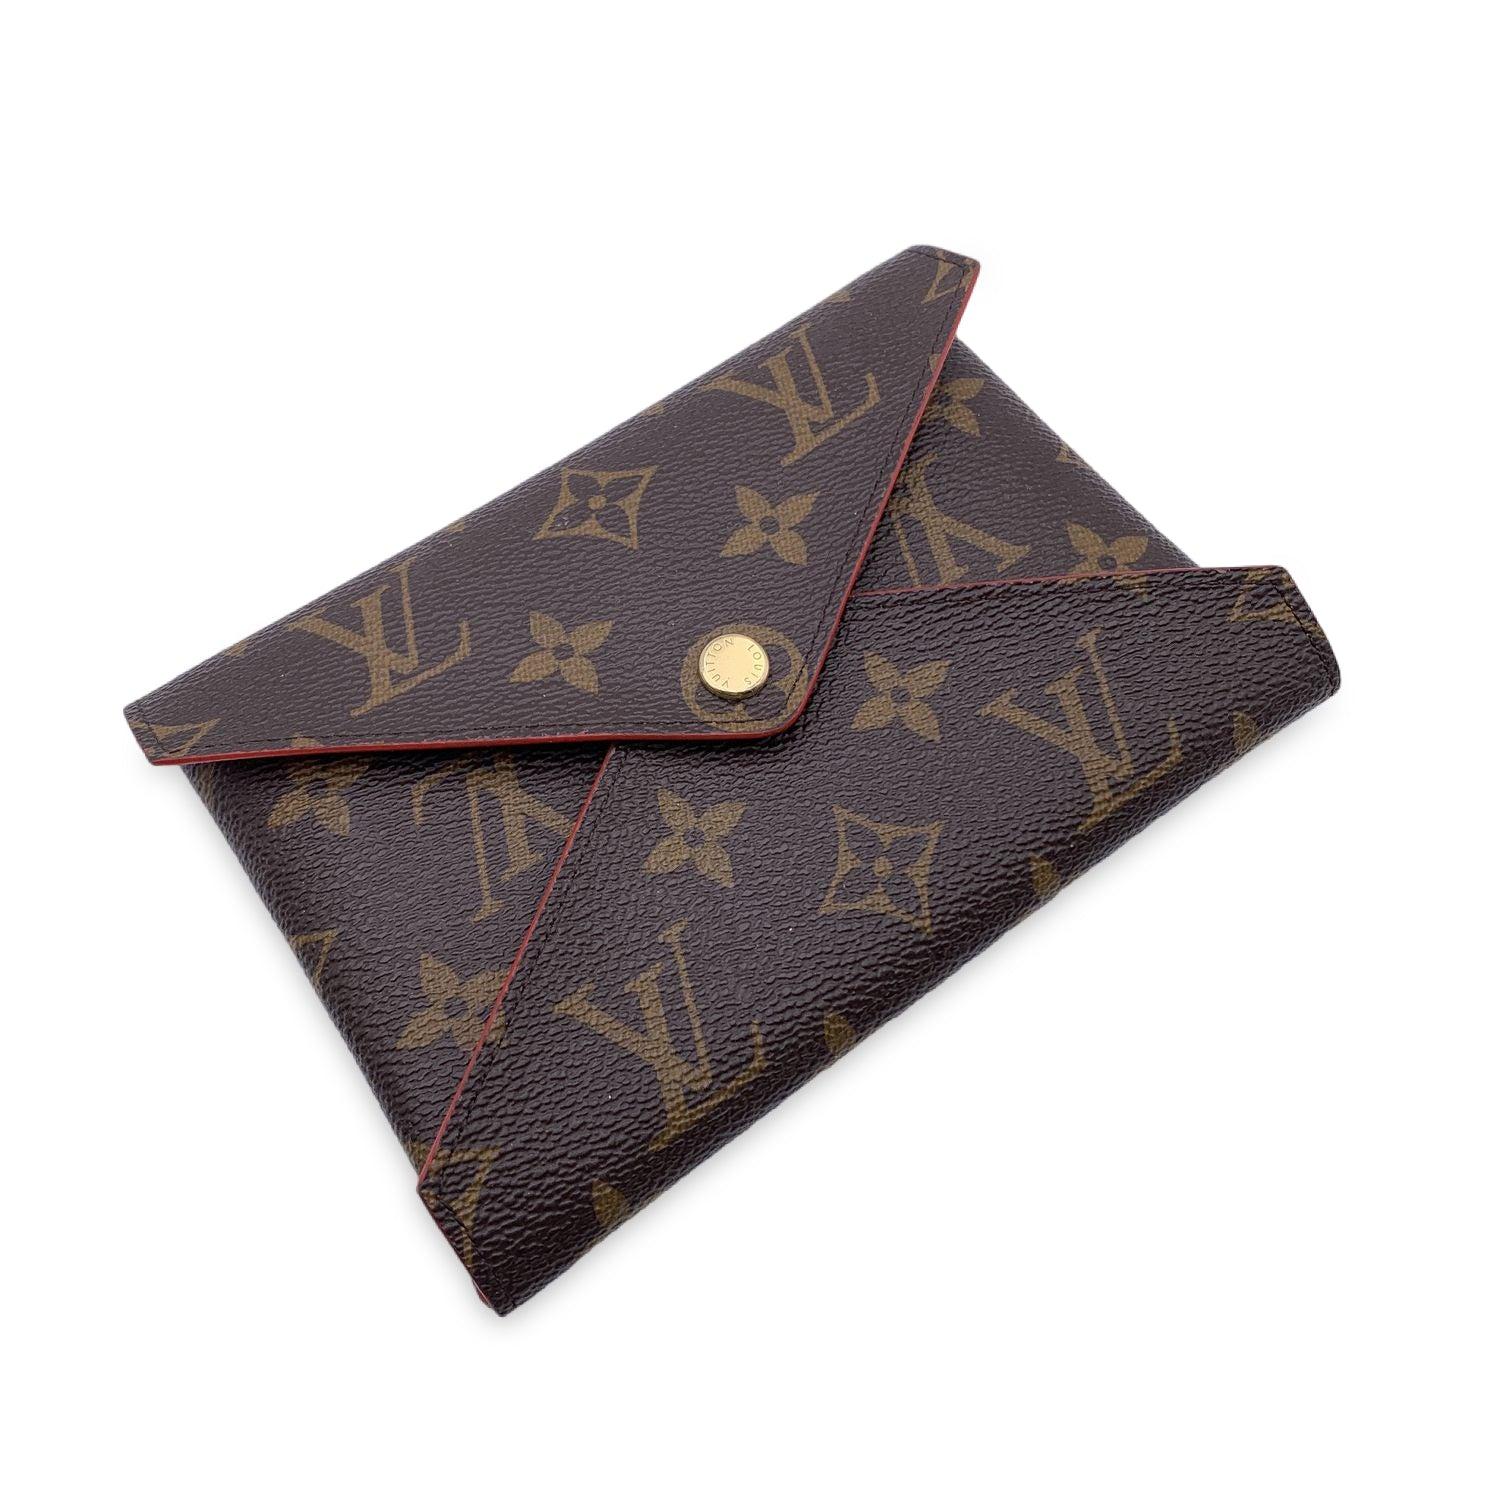 LOUIS VUITTON 'Pochette Kirigami', medium size. Crafted od monogram canvas with red leather interior. The medium model can hold a passport. Flap with button closure. 'Louis Vuitton Paris - Made in France' embossed inside. Condition A - EXCELLENT